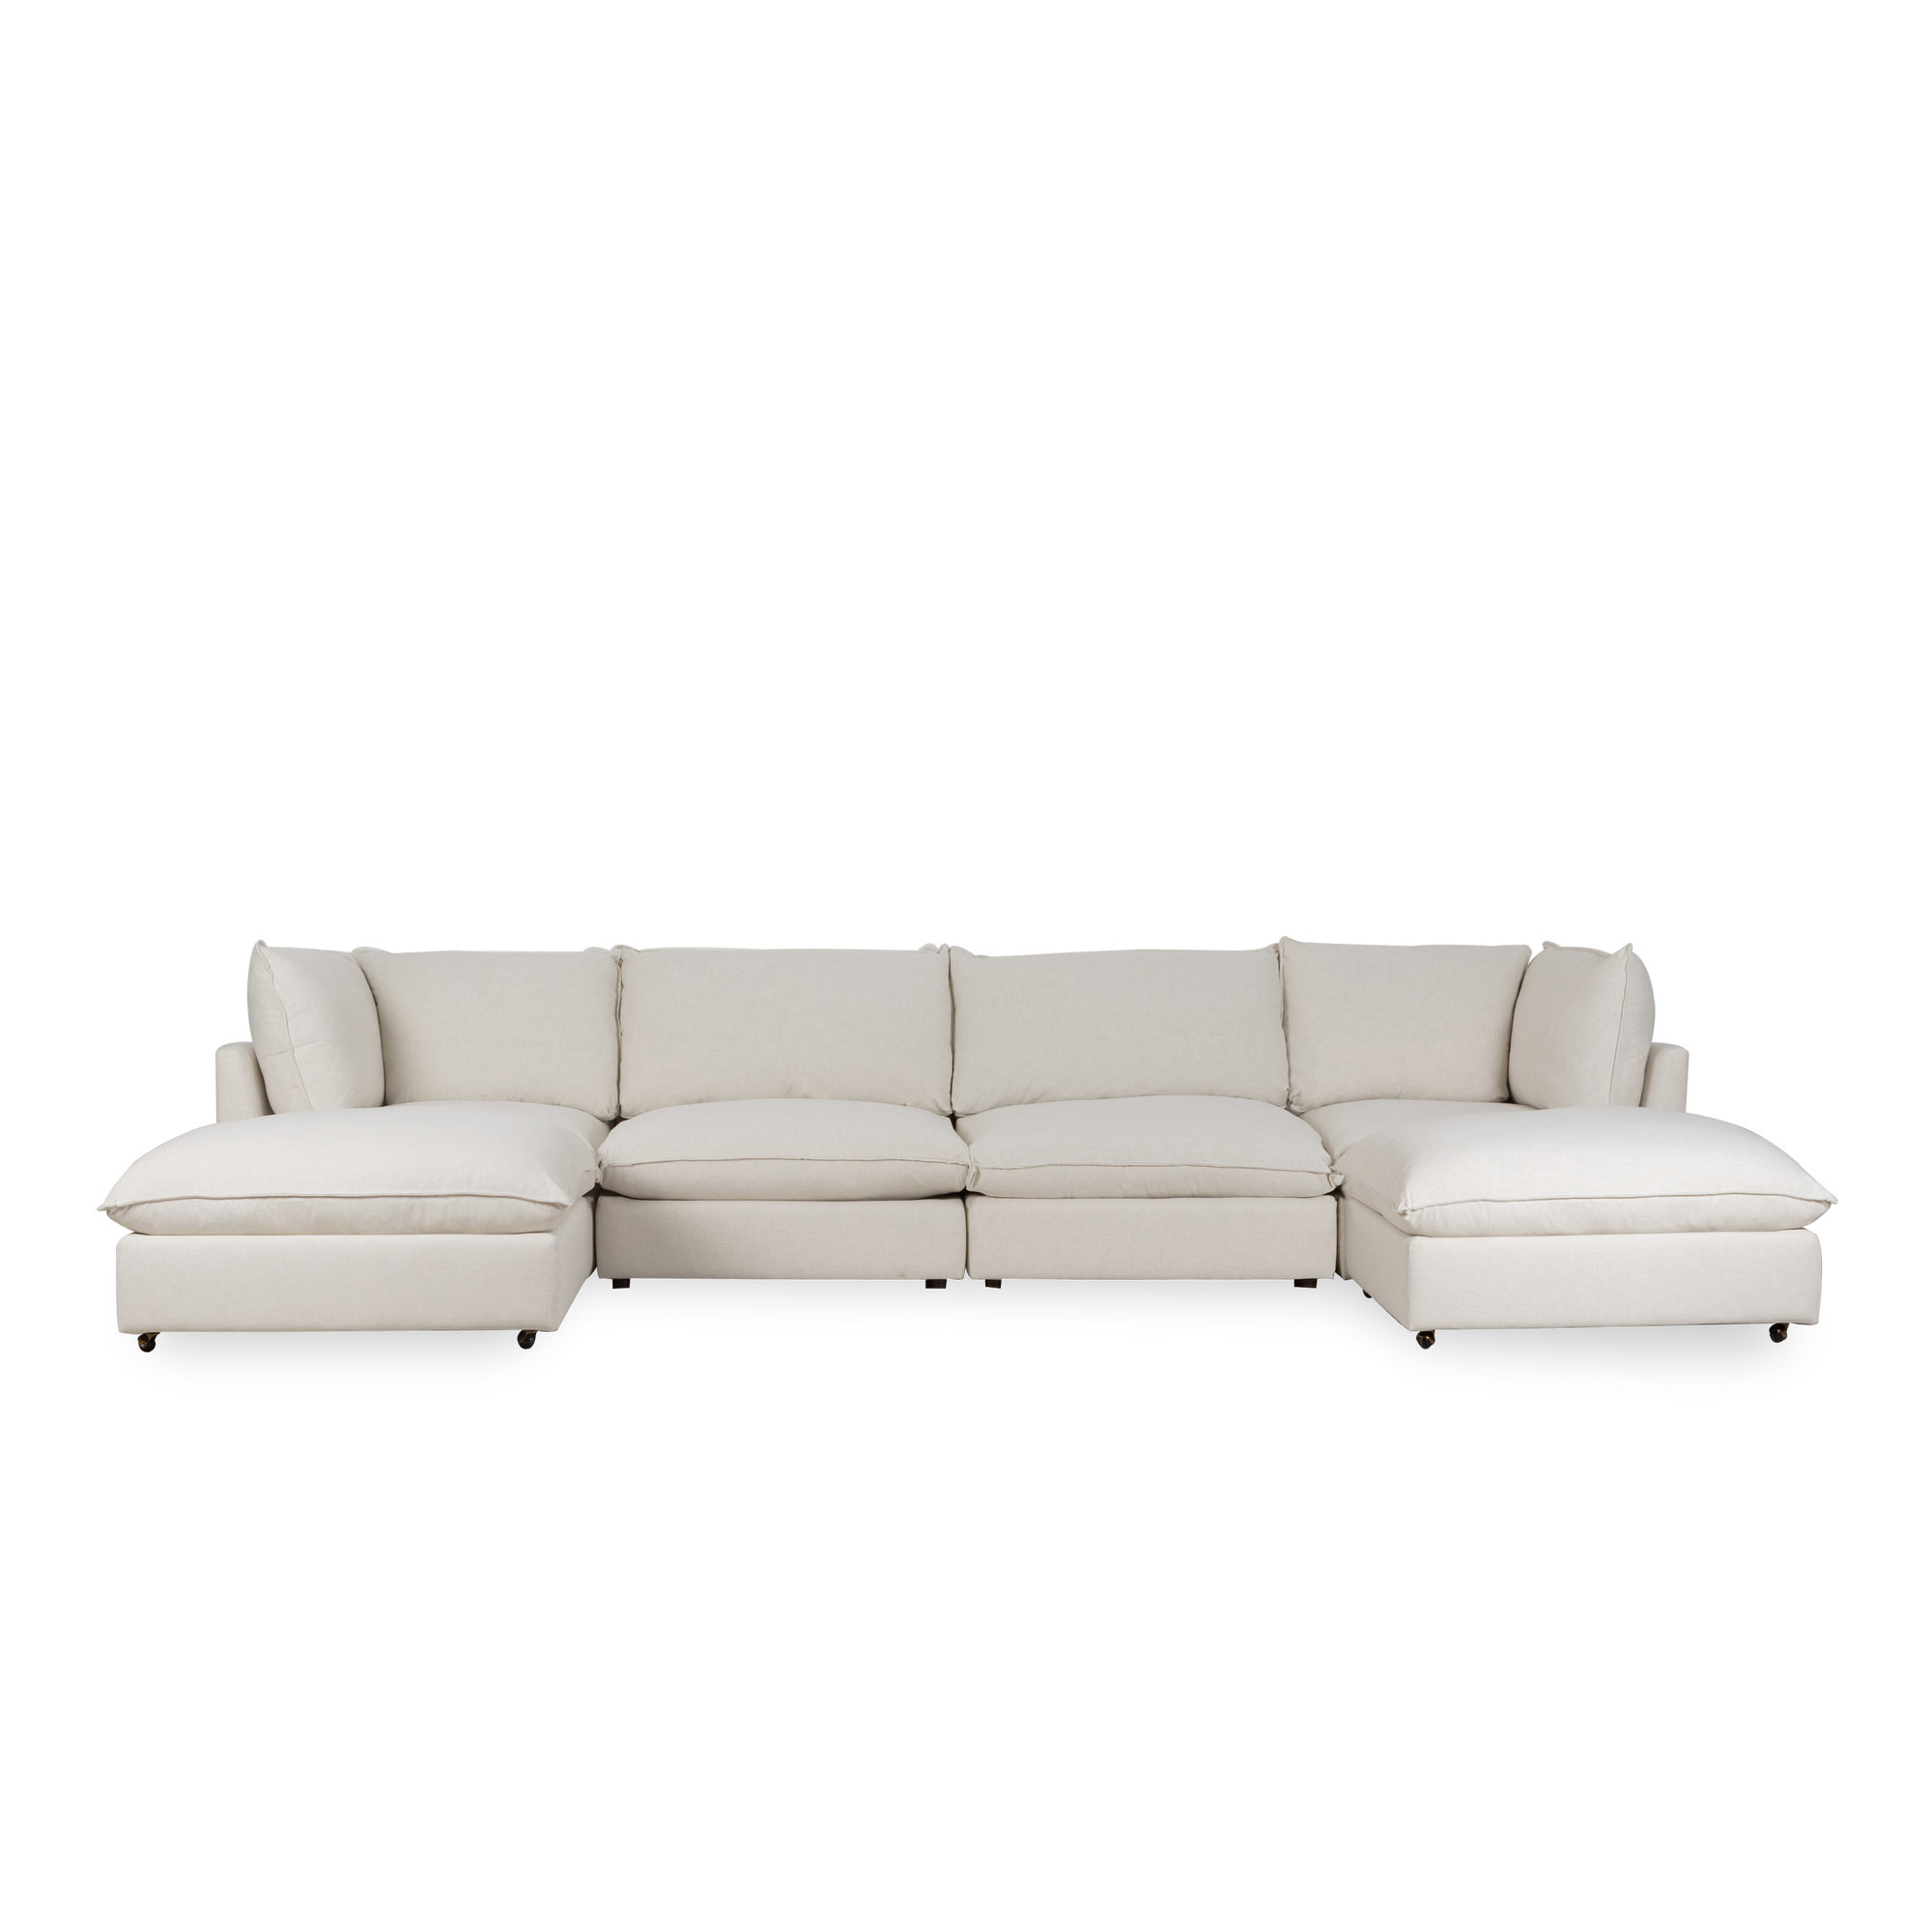 Warm and inviting, the Byers Modular Sectional is a beautiful display of clean lines and soft edges.